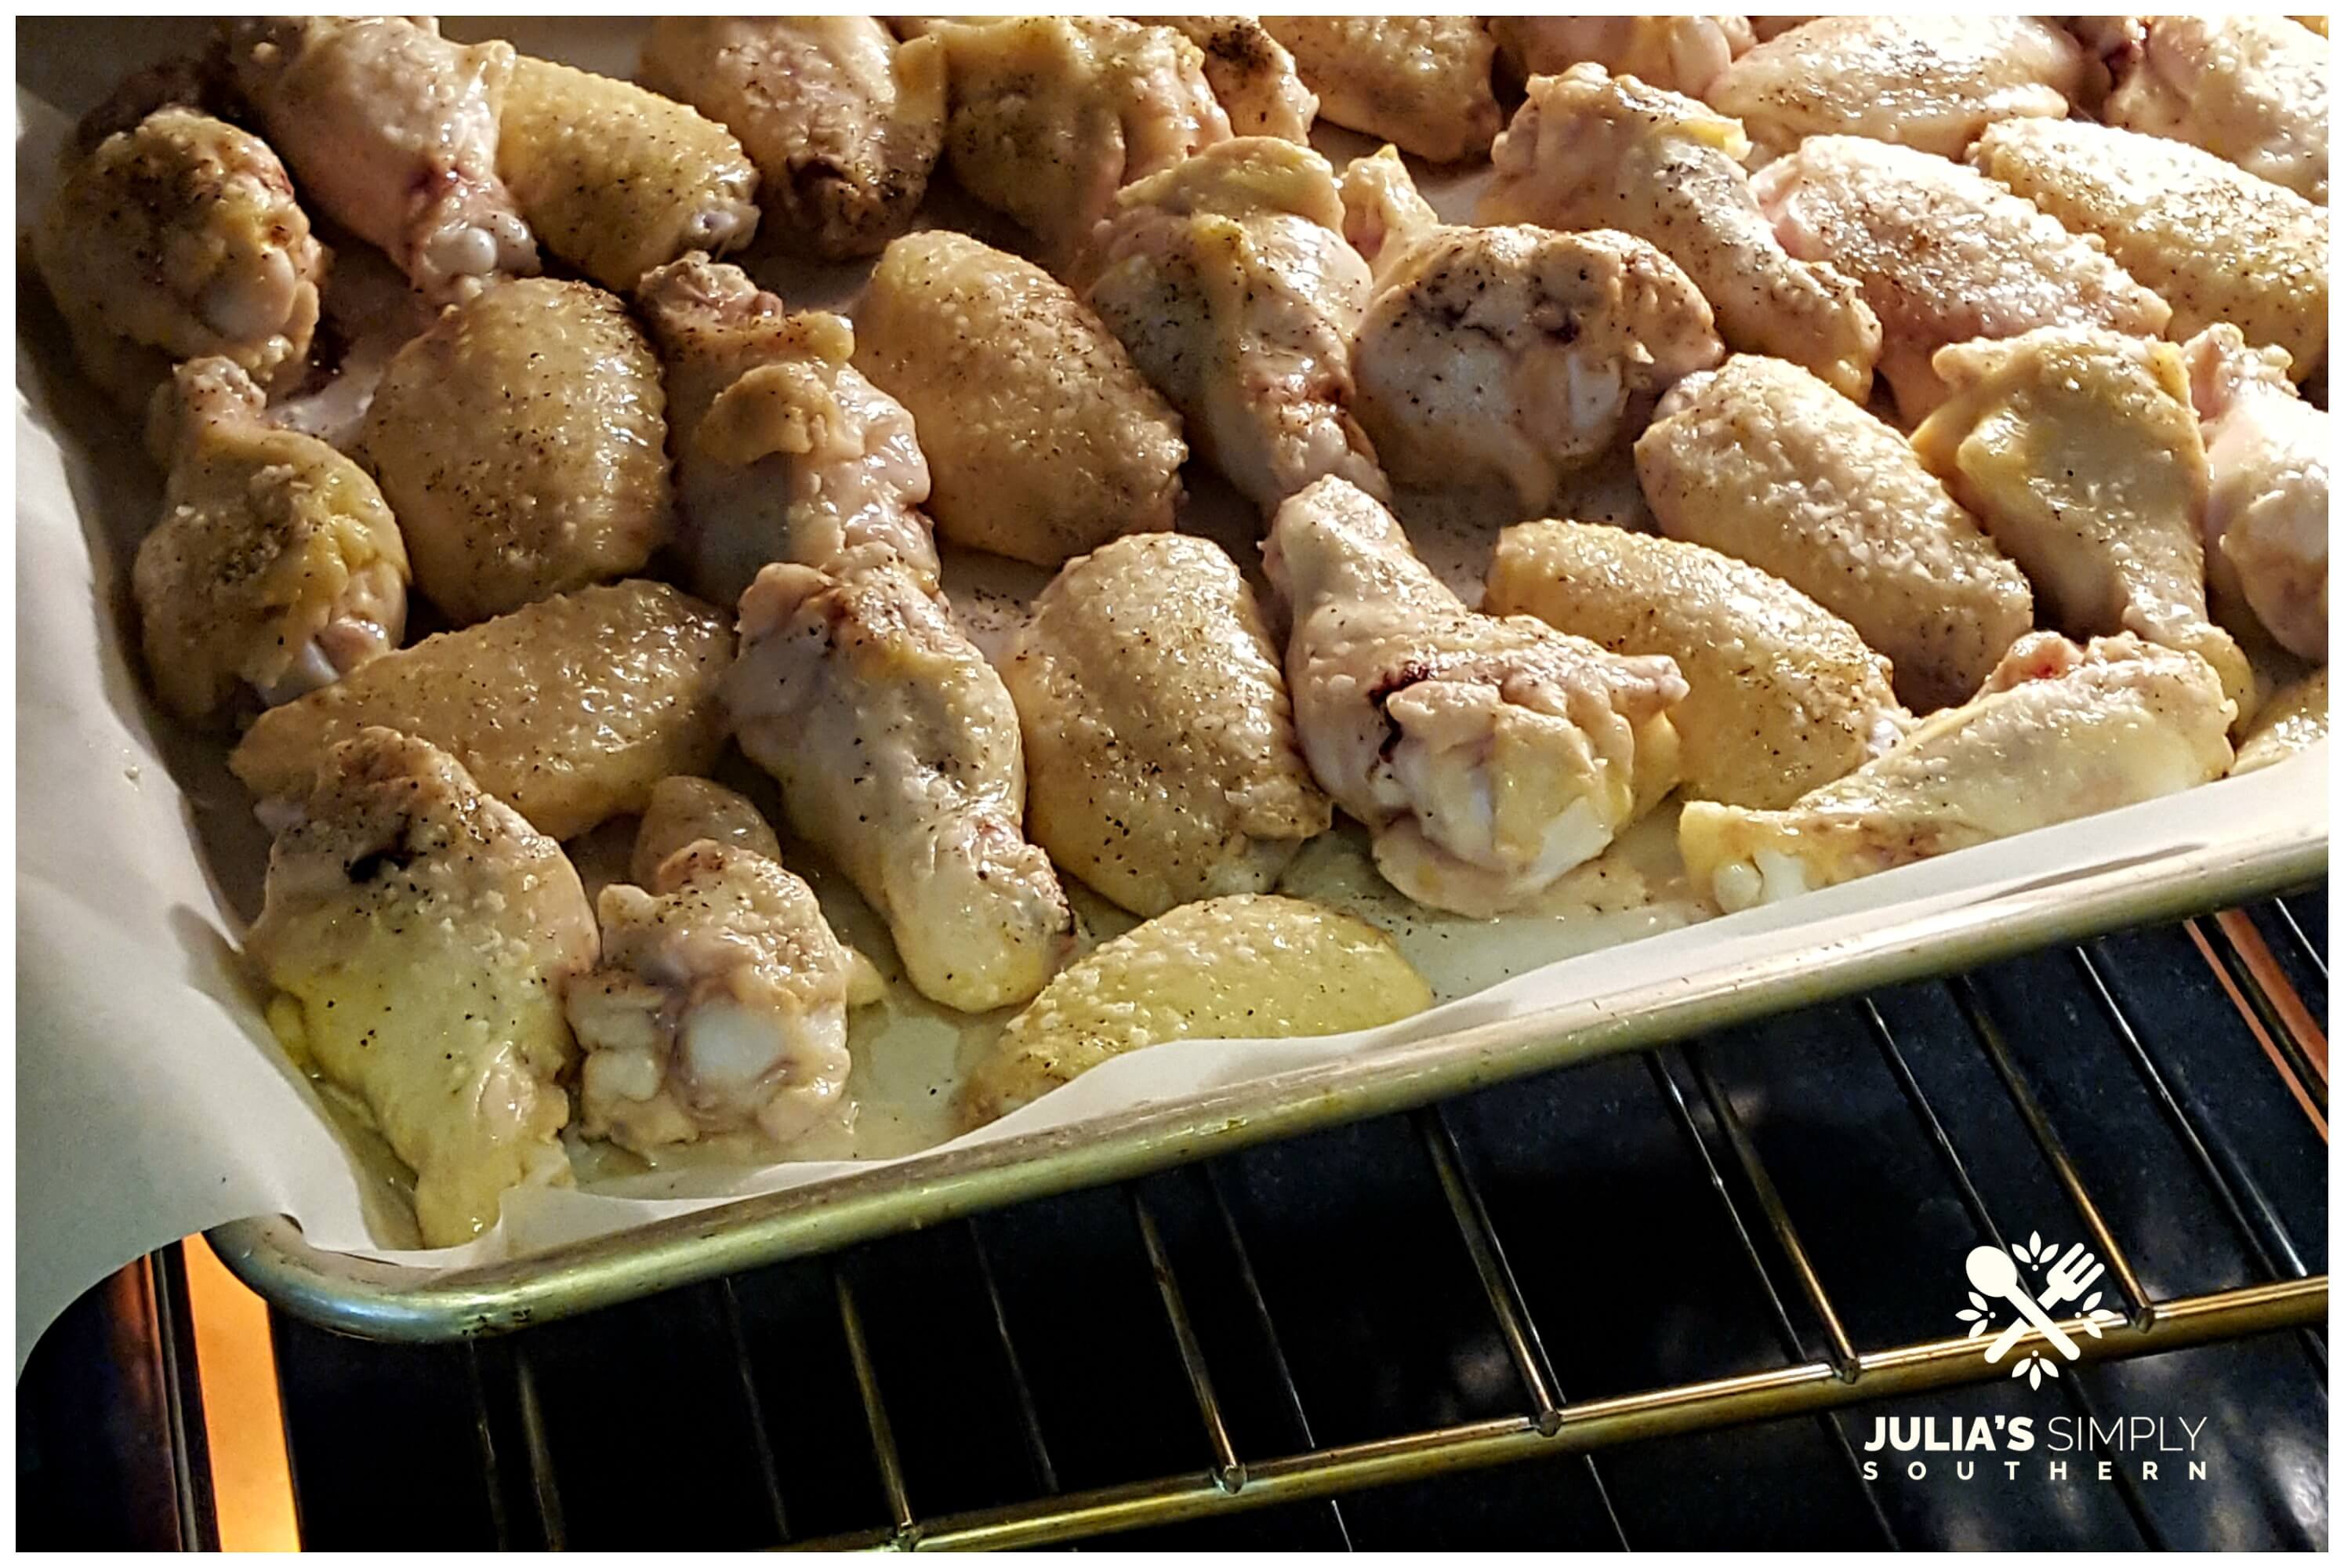 Baking chicken wings for football gatherings and tailgating 